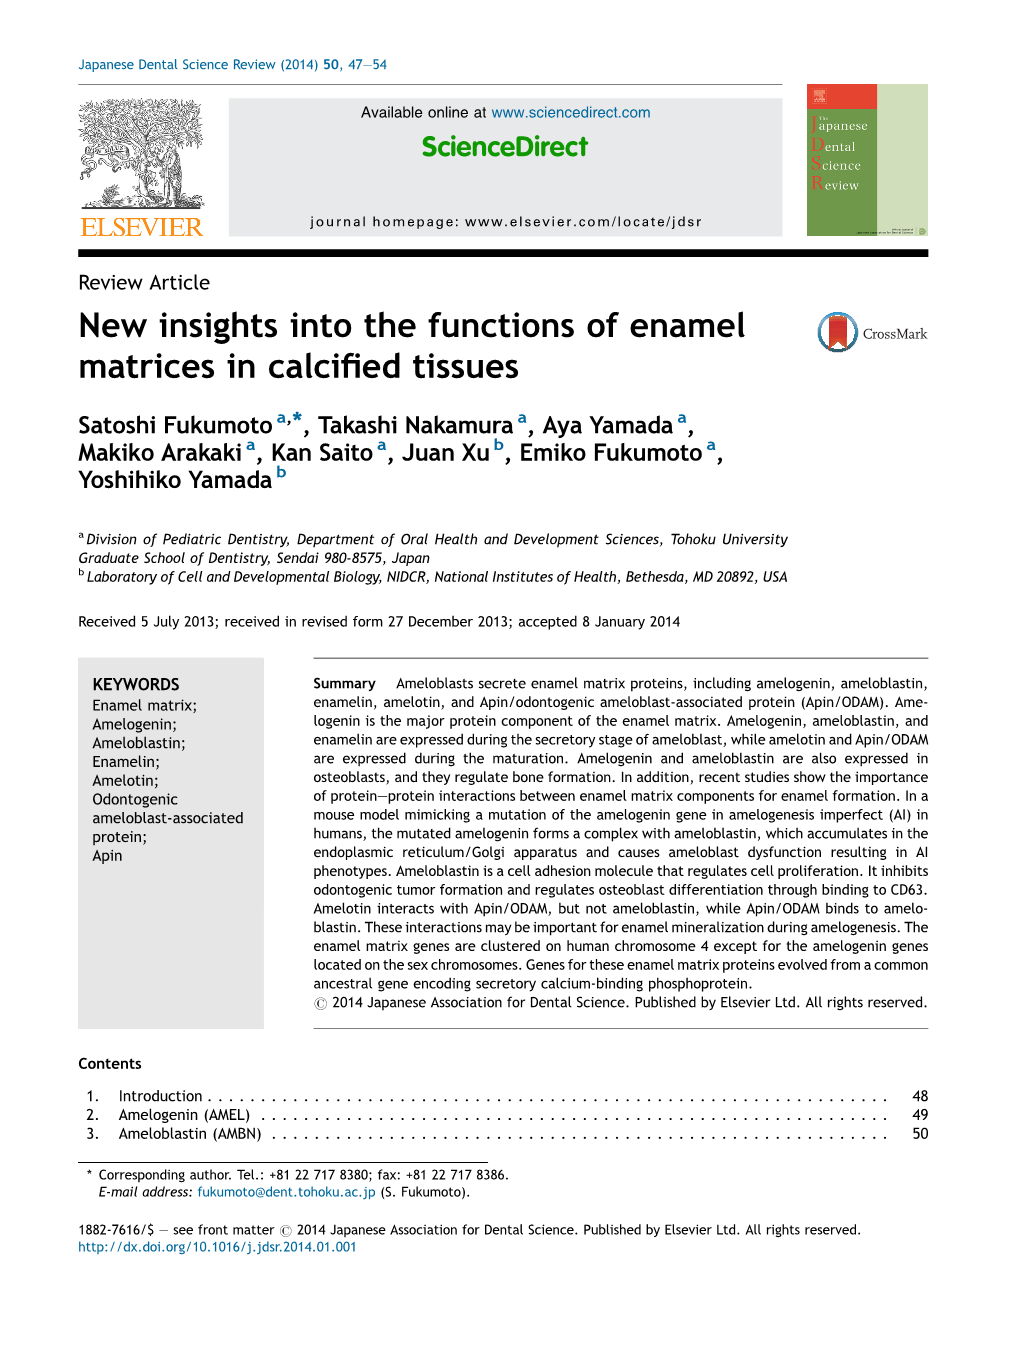 New Insights Into the Functions of Enamel Matrices in Calcified Tissues